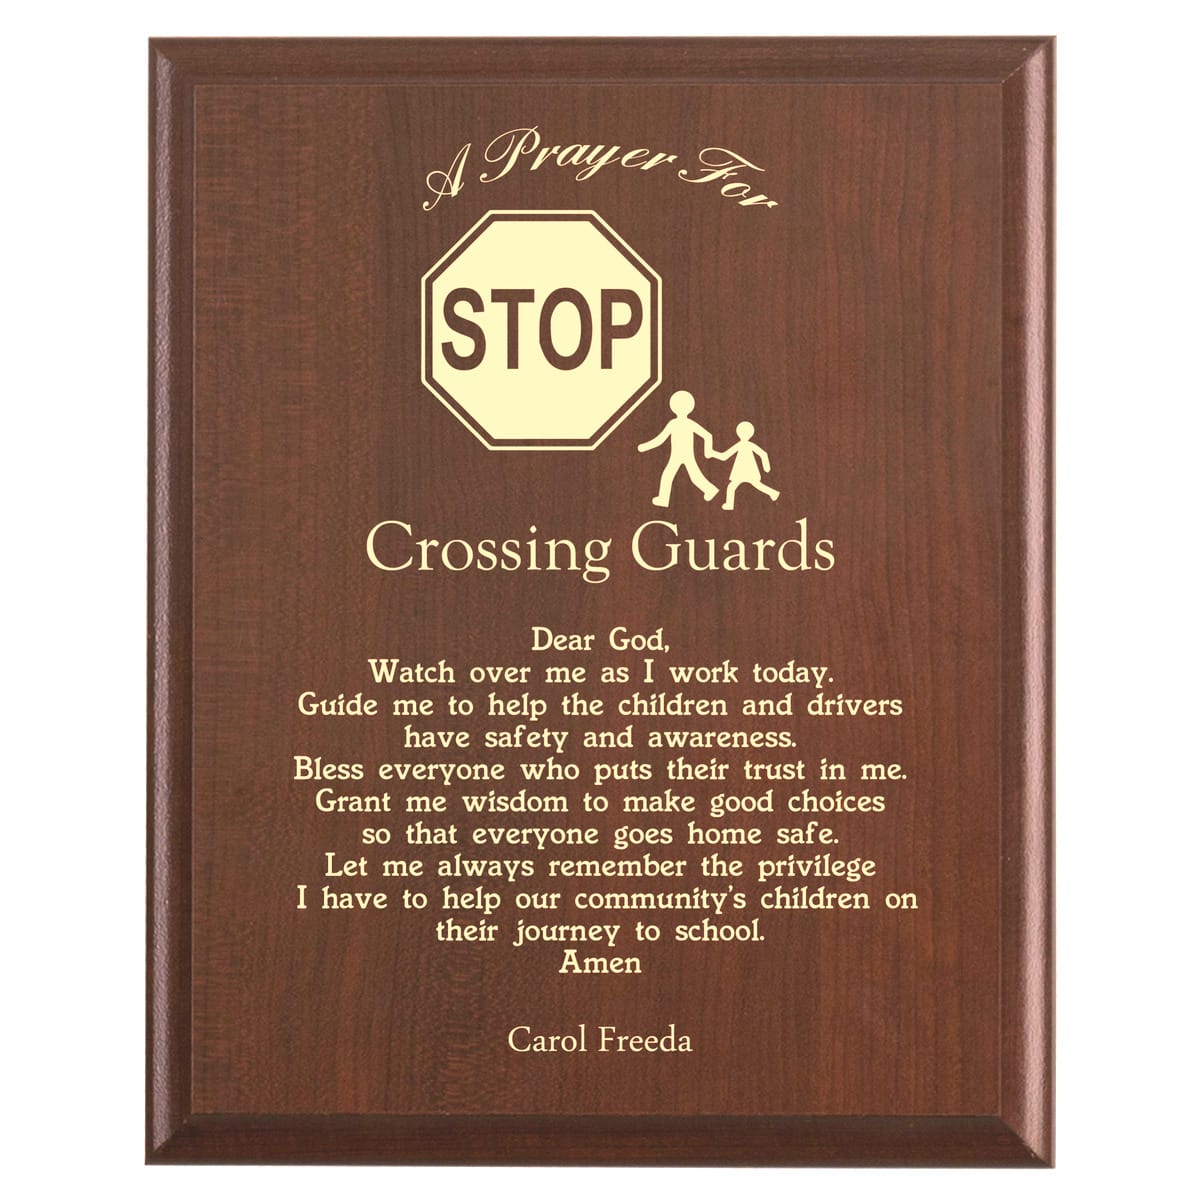 Plaque photo: Crossing Guard Prayer Plaque design with free personalization. Wood style finish with customized text.